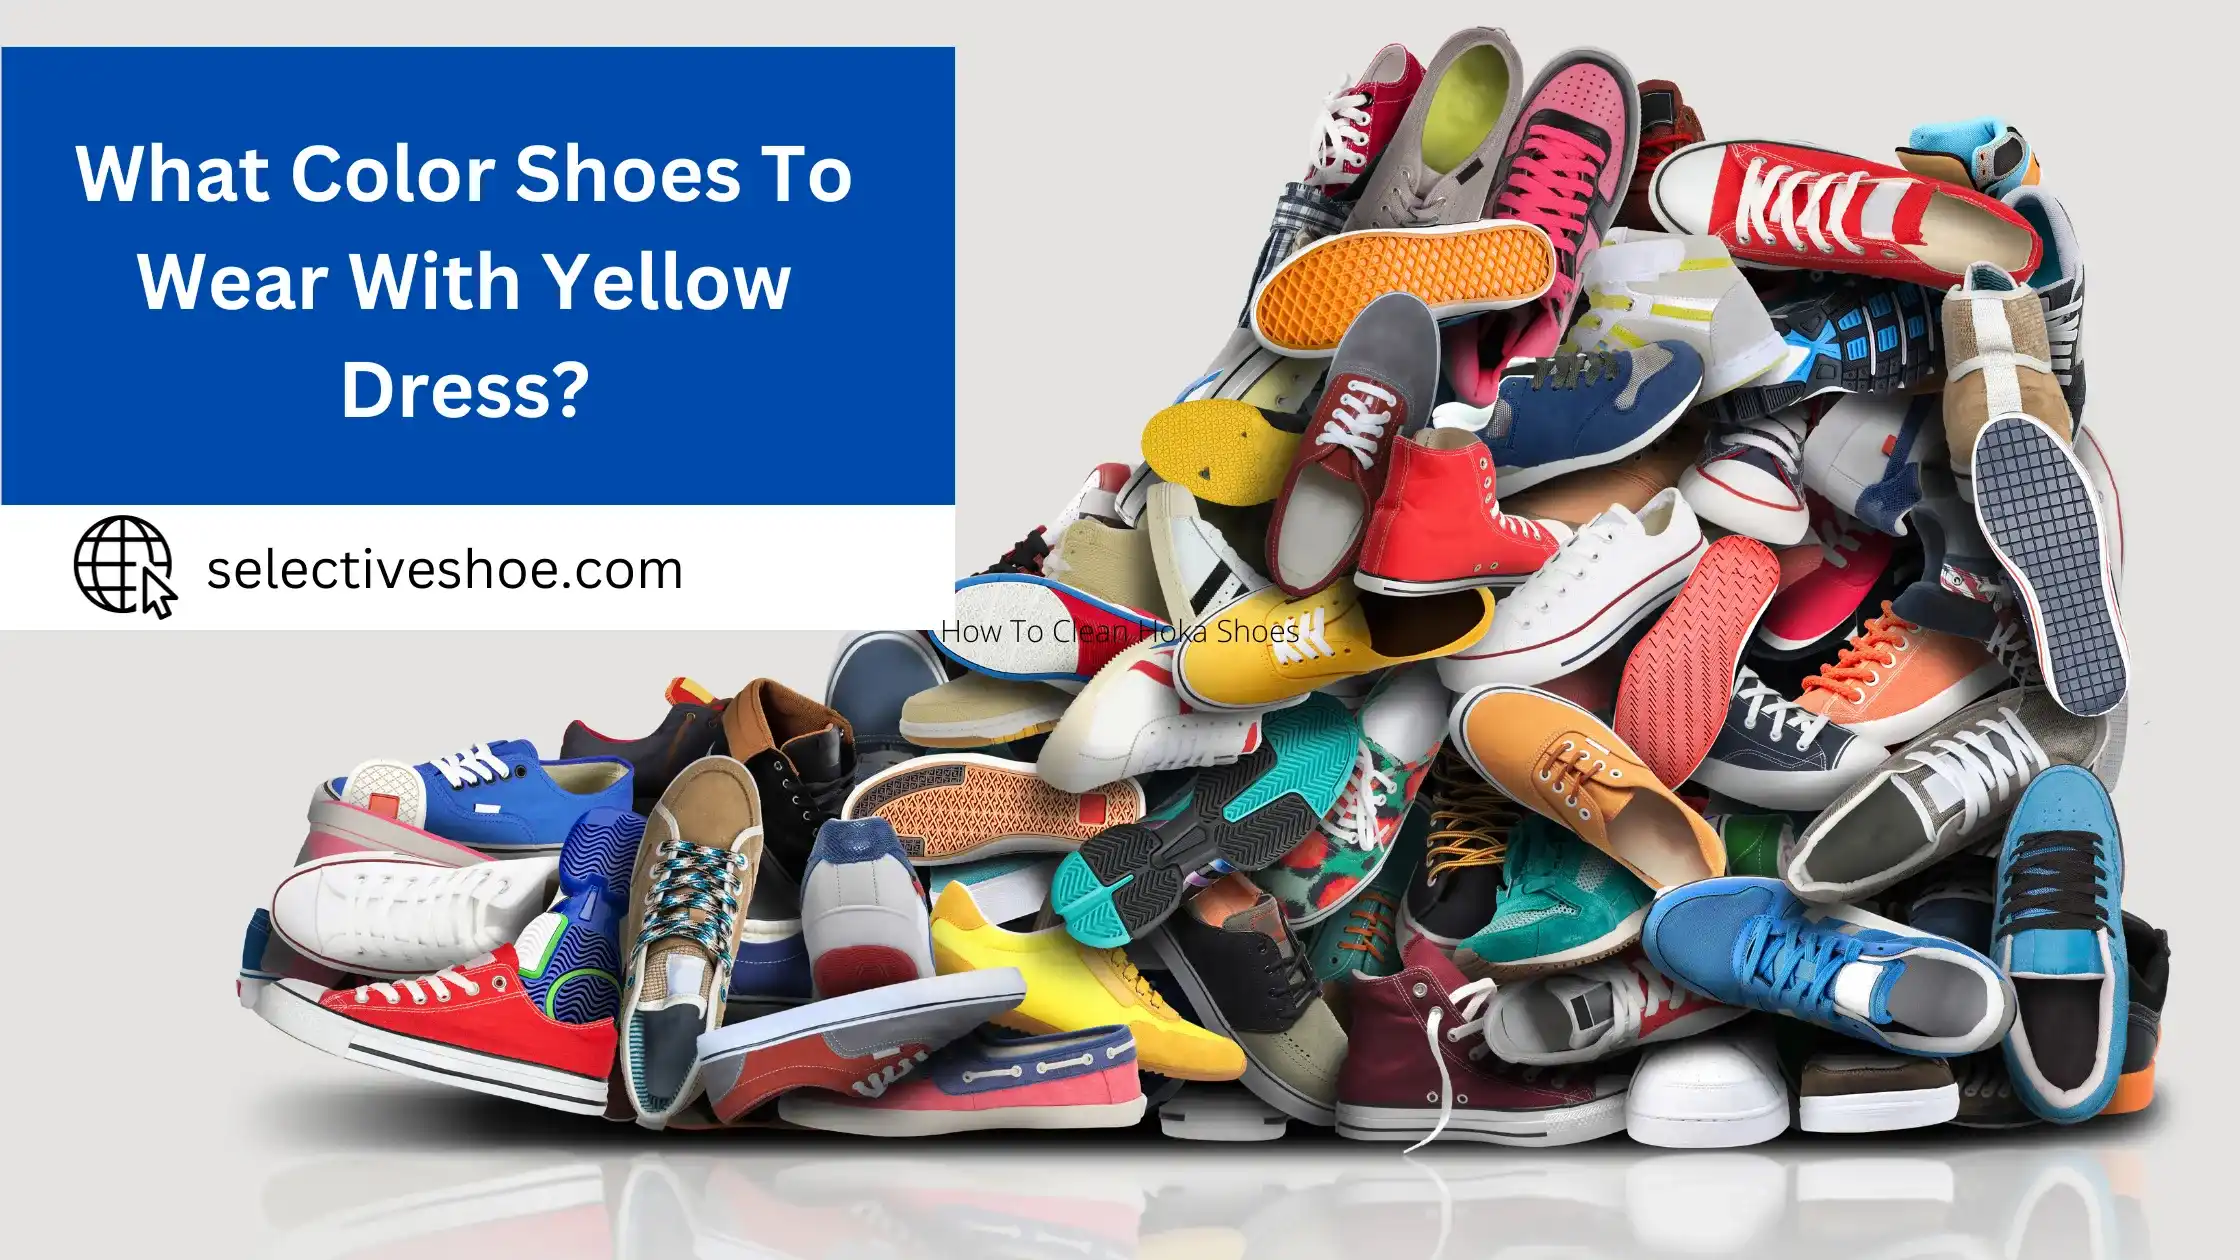 What Color Shoes to Wear With Yellow Dress? Easy Guide